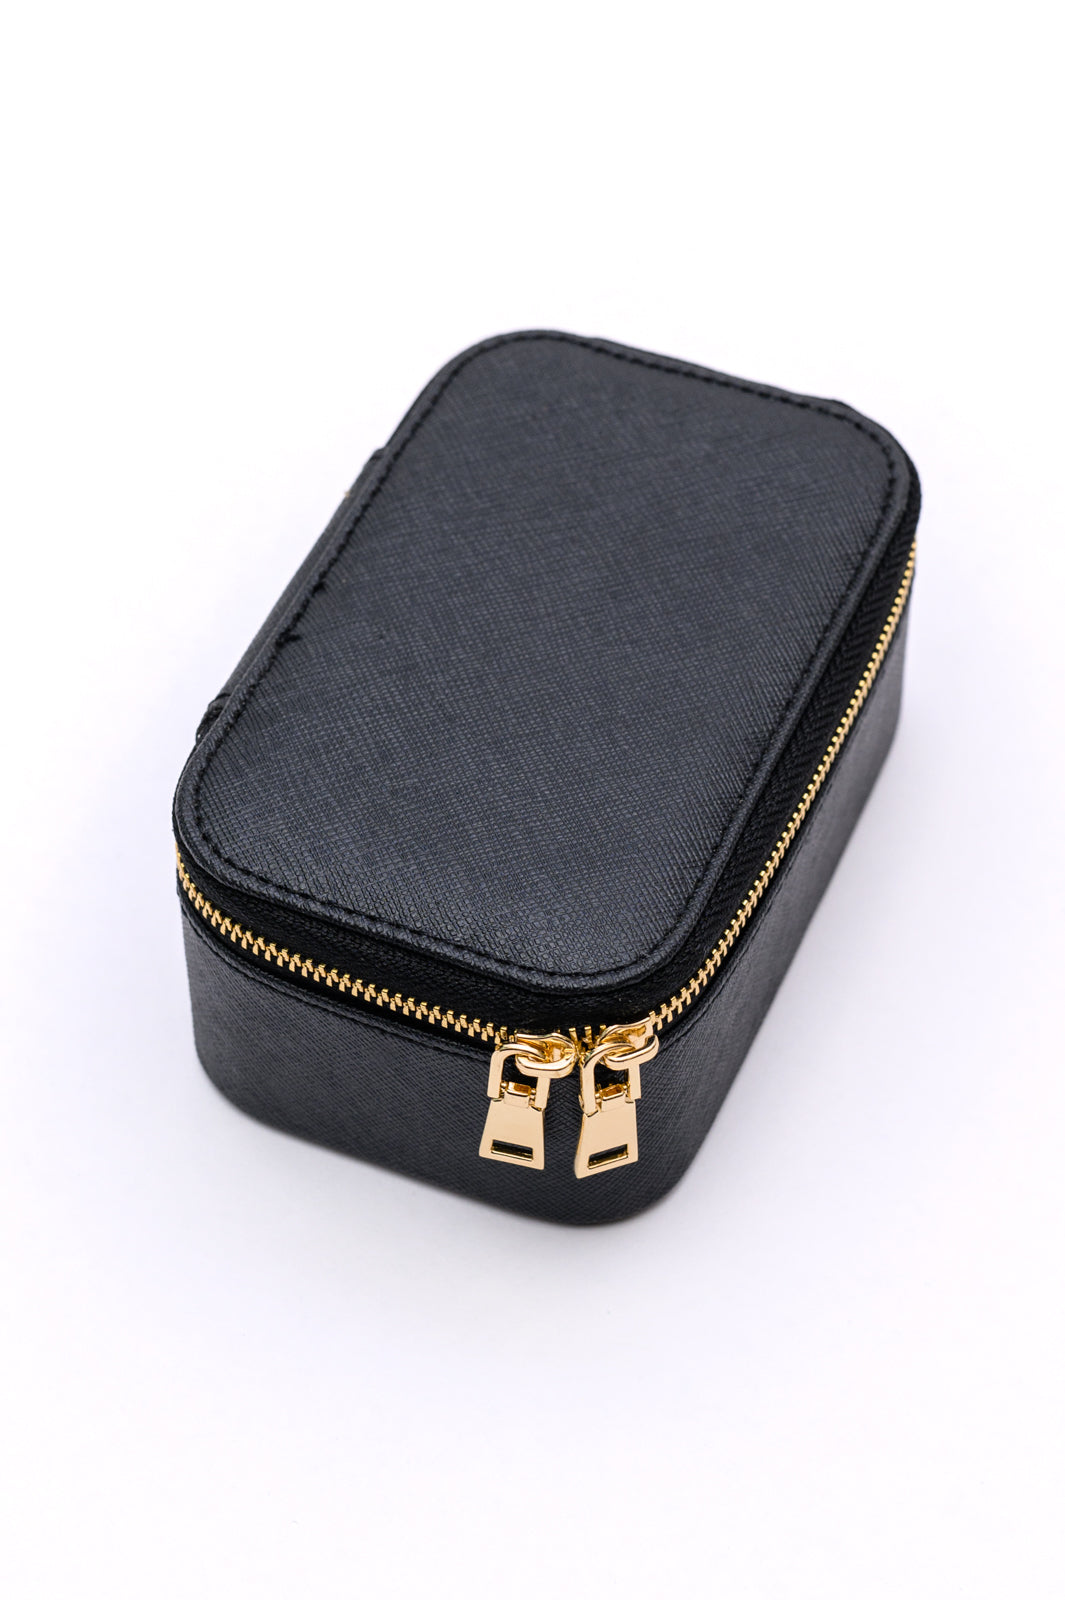 Travel Jewelry Case in Black - Three Bears Boutique